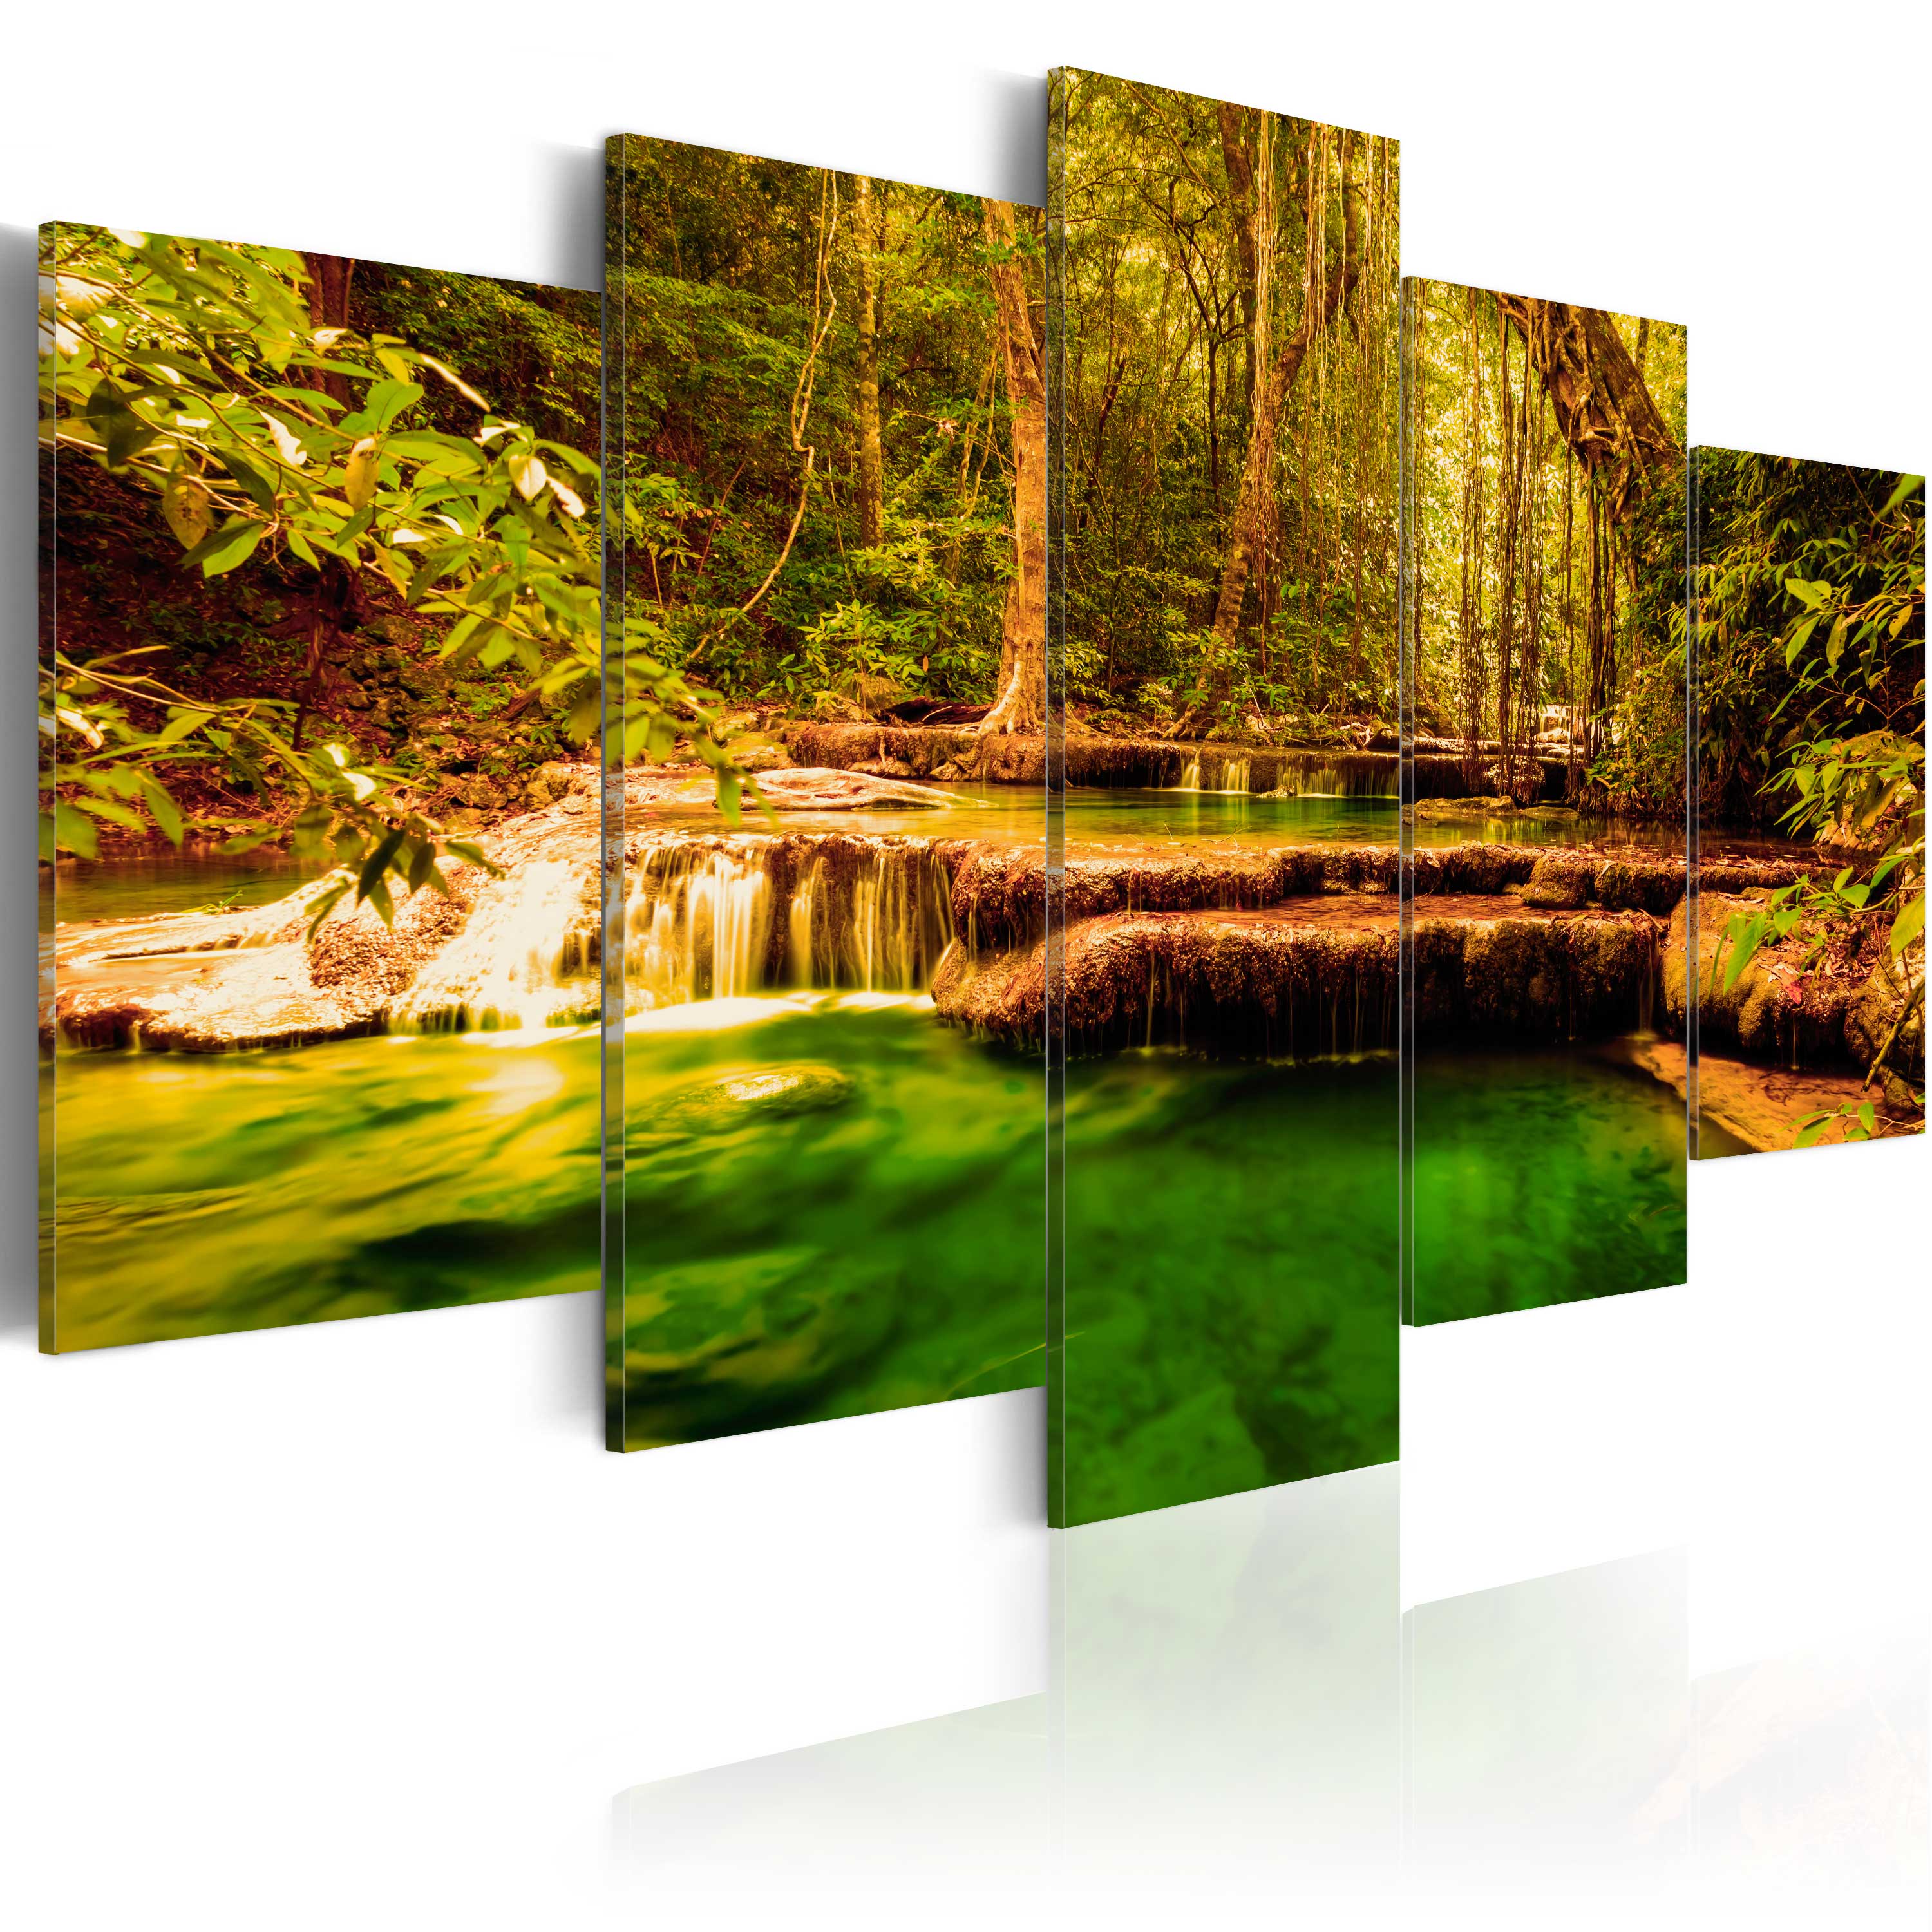 Canvas Print - Beauty of nature: waterfall - 200x100